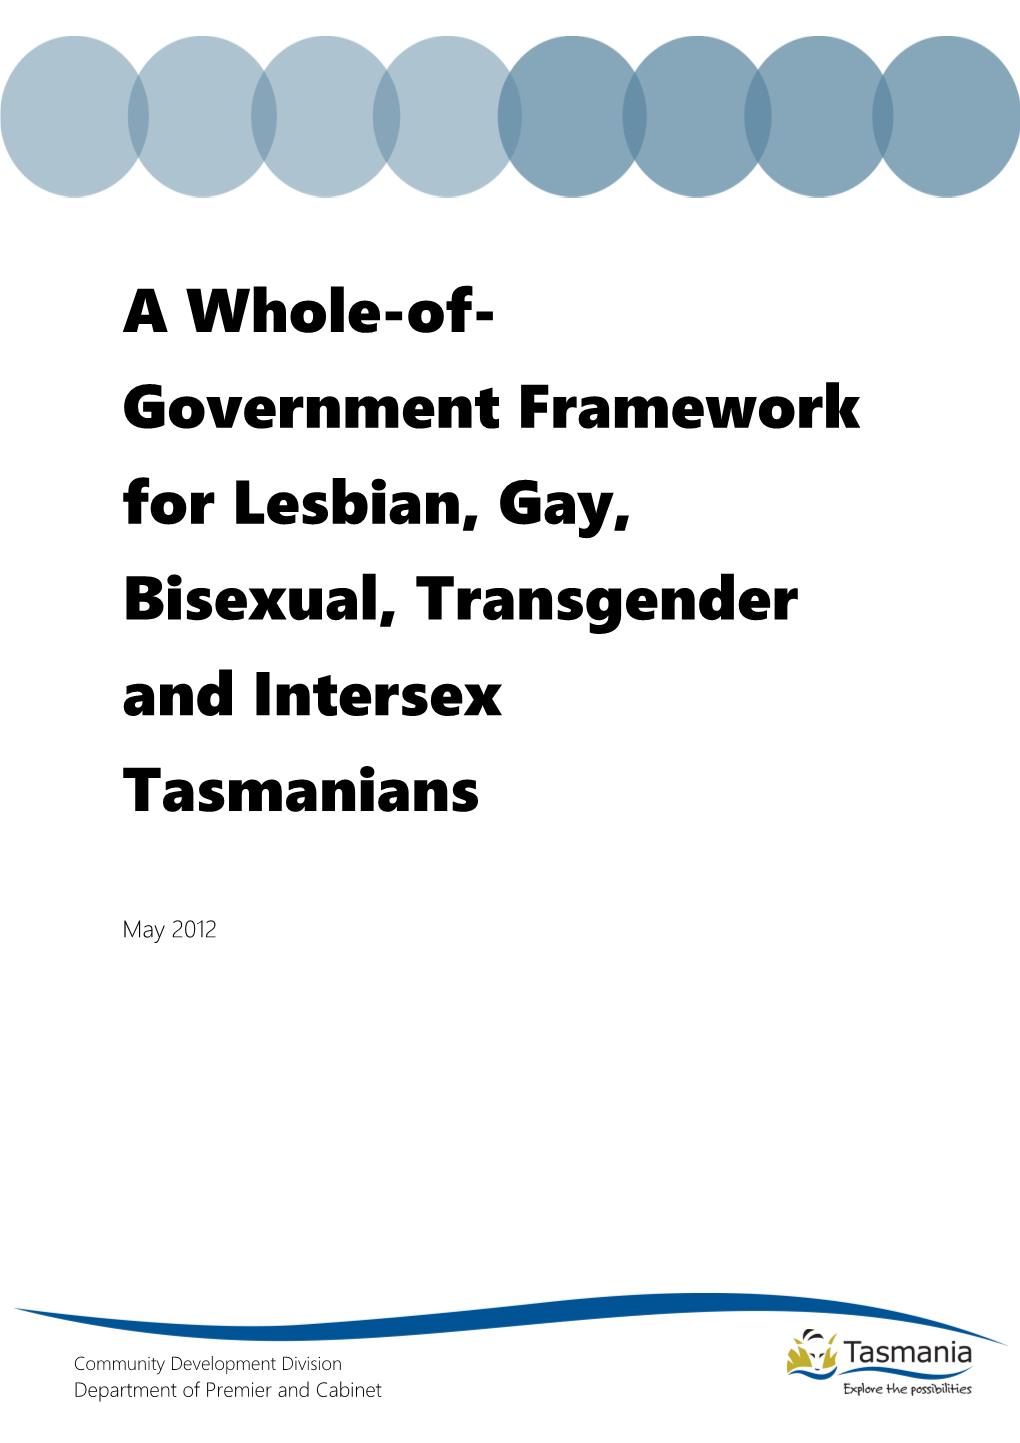 A Whole-Of-Government Framework for Lesbian, Gay, Bisexual, Transgender and Intersex Tasmanians